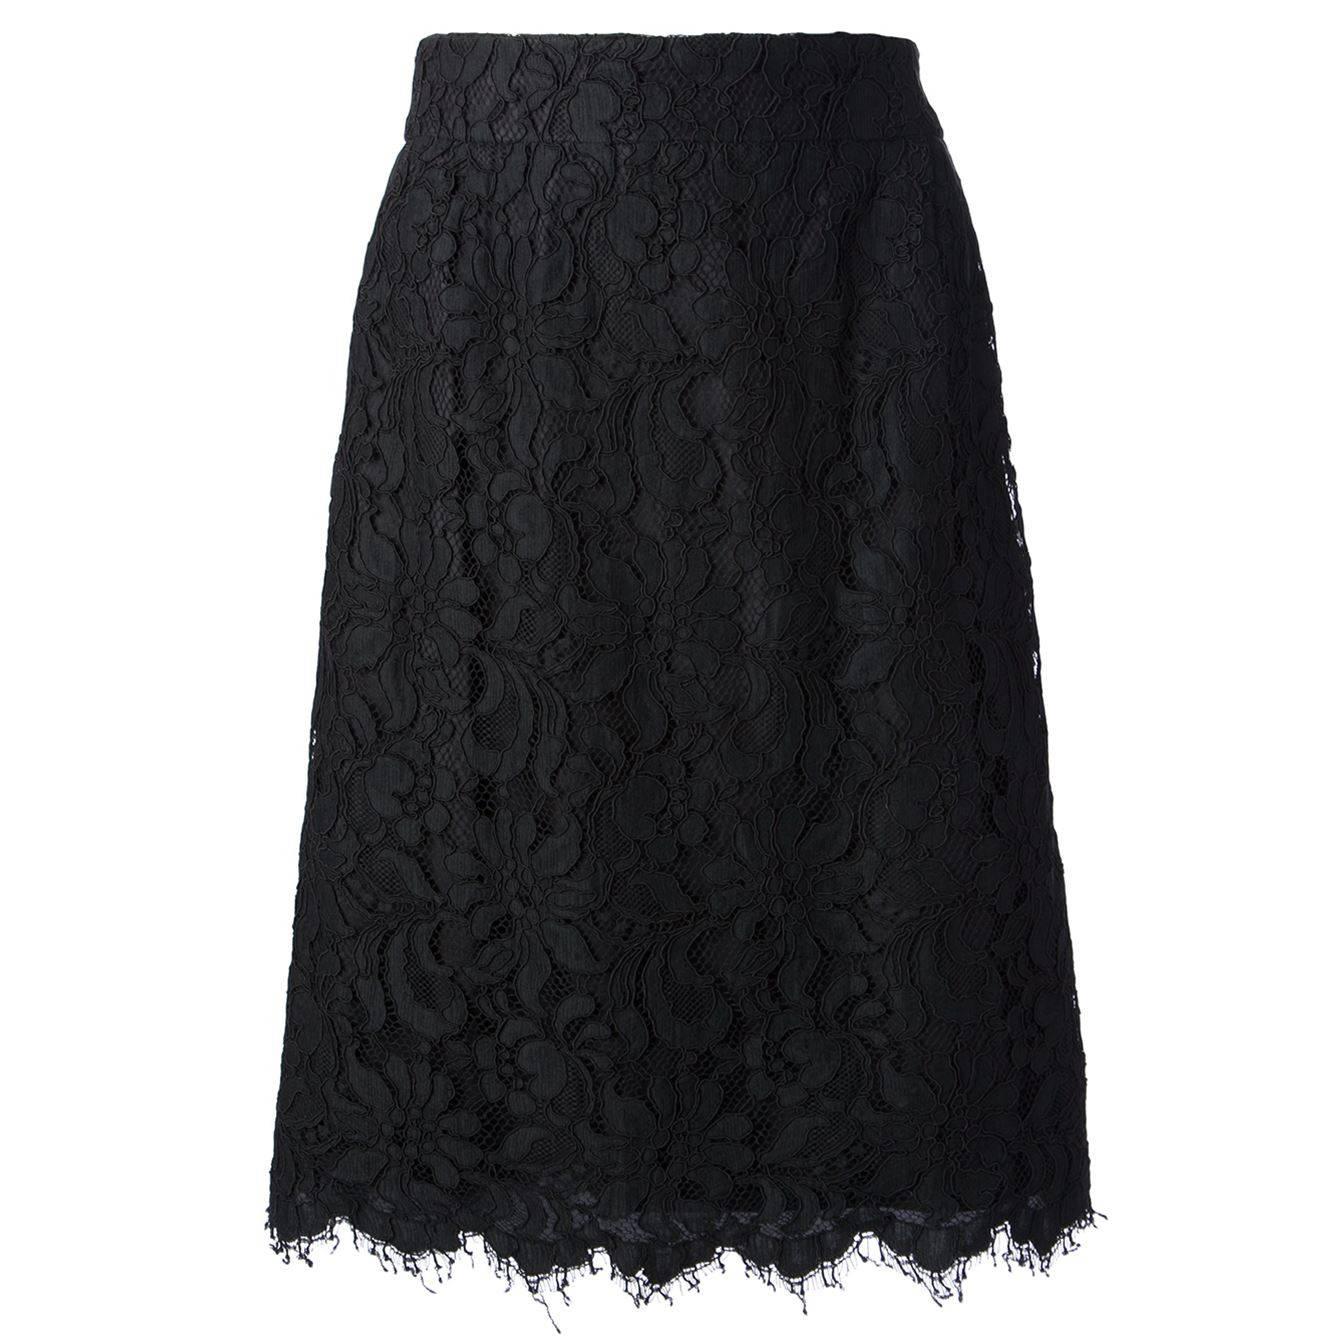 Christian Lacroix from the Suzy Menkes Collection Floral Lace Skirt